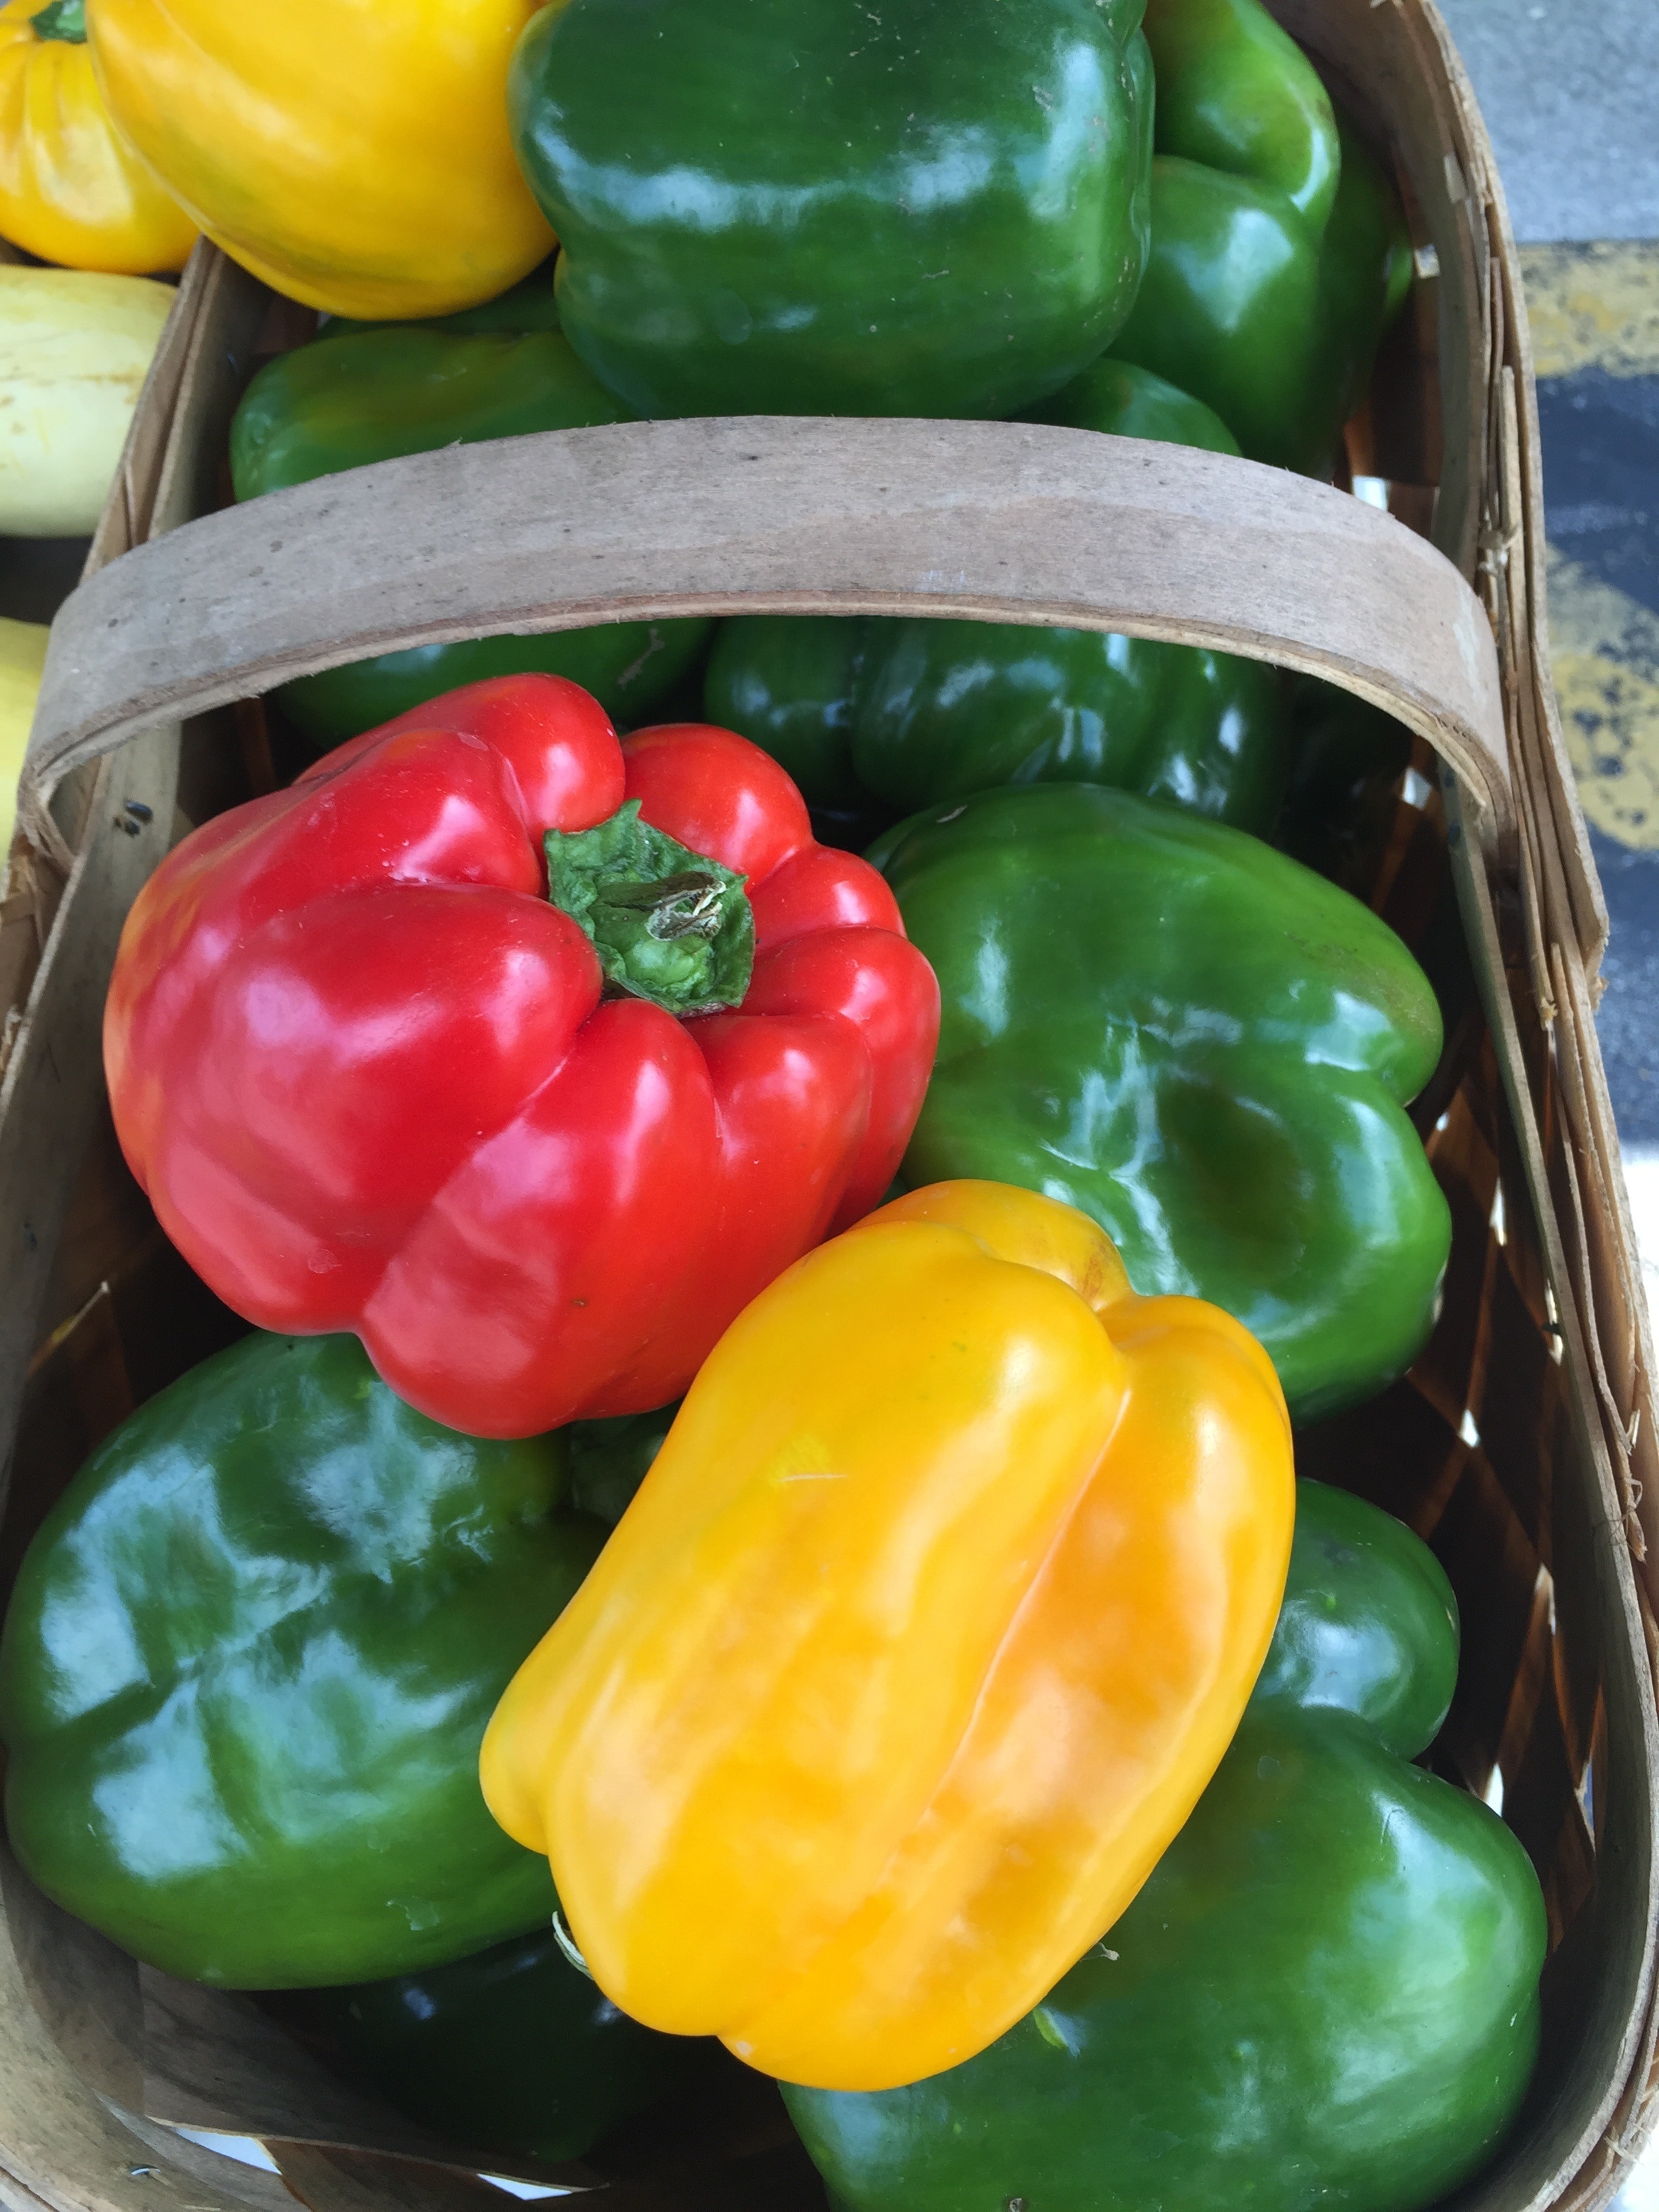 Peppers, Green Pepper, Red Pepper, green color, vegetable